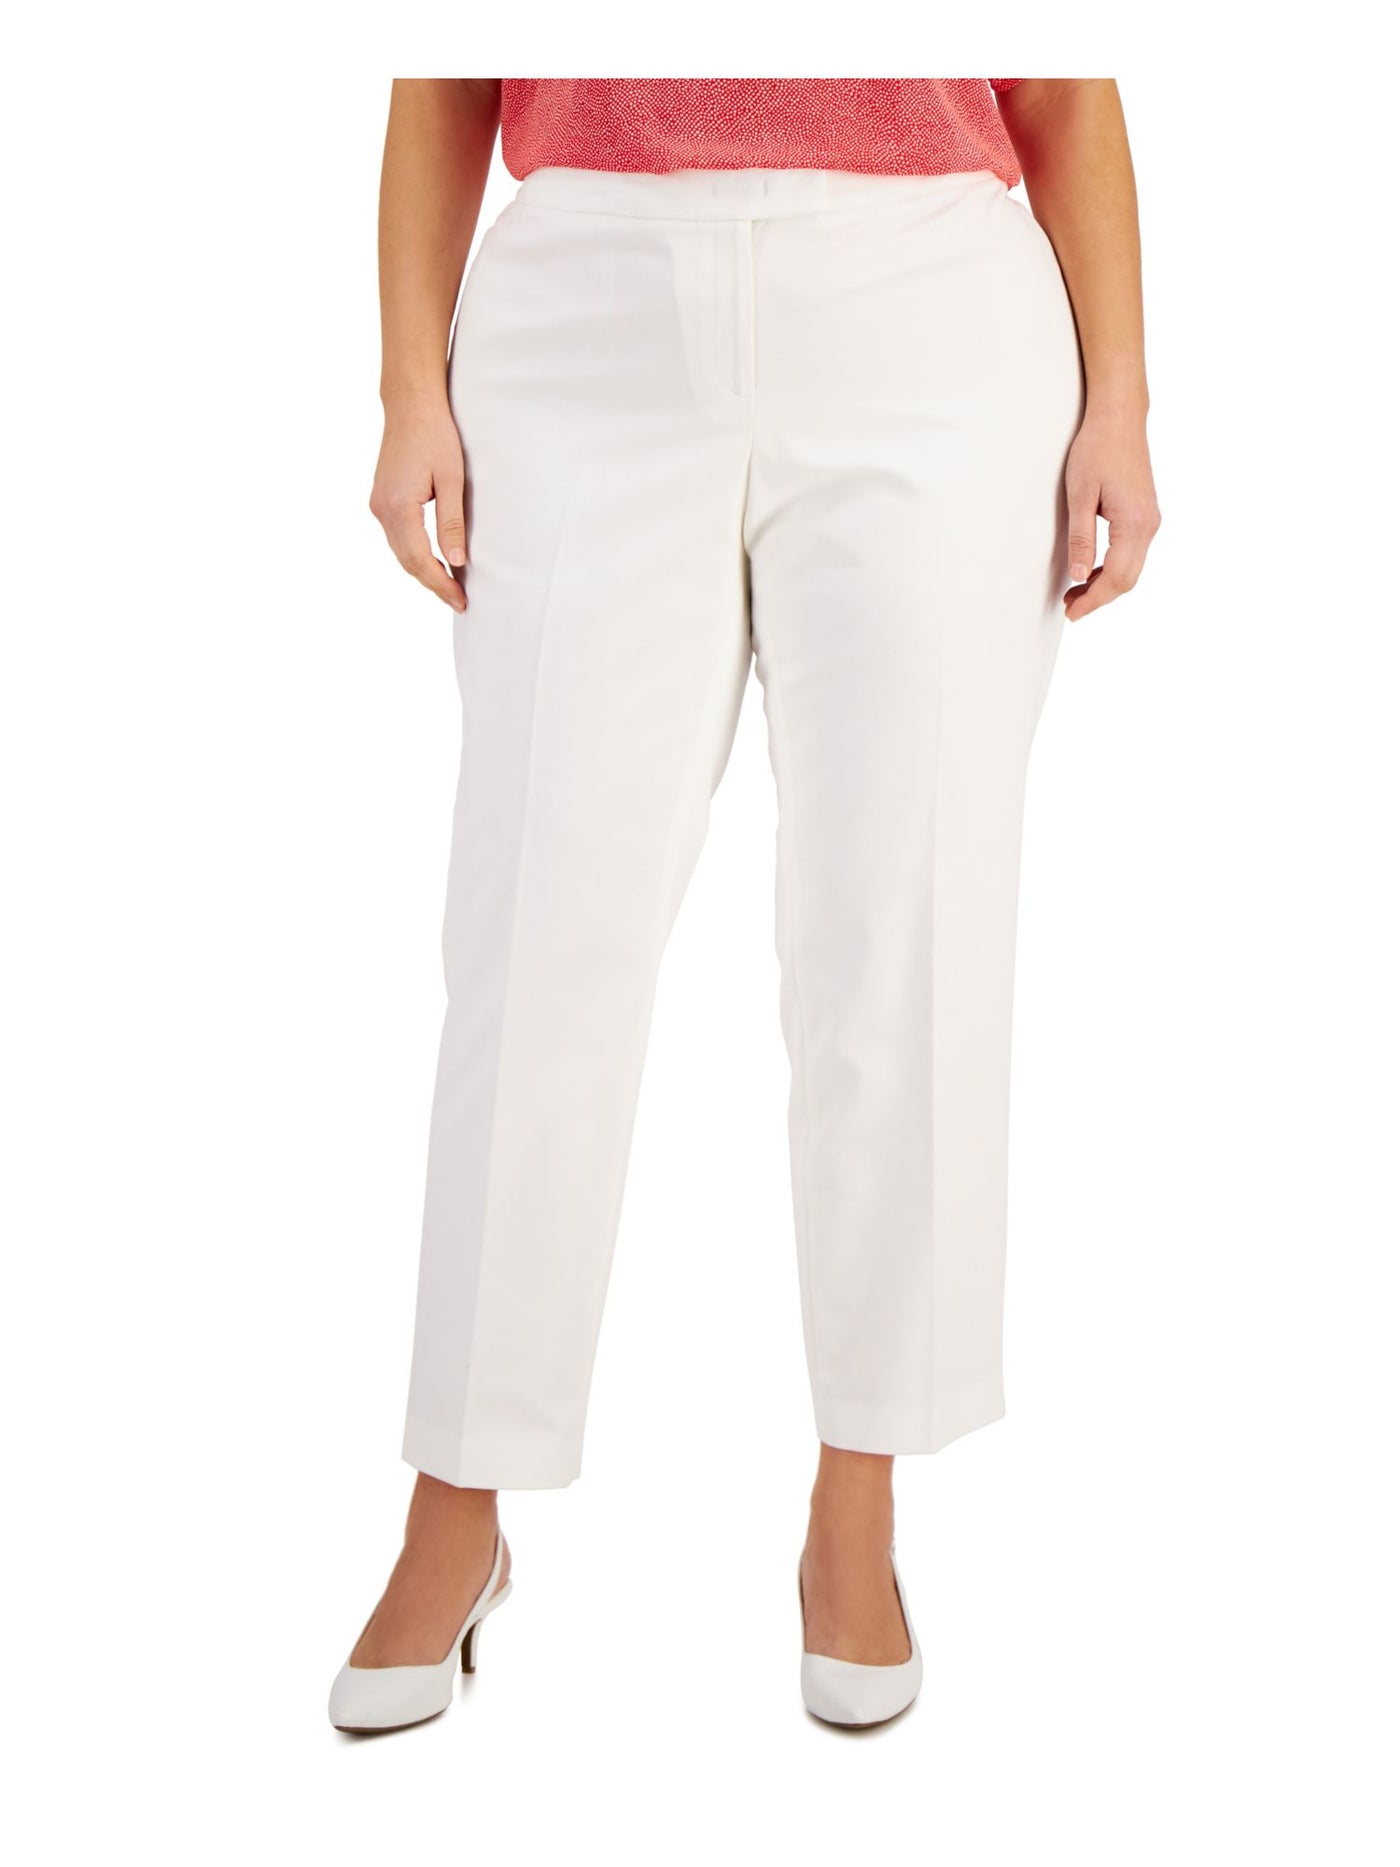 ANNE KLEIN Womens White Zippered Pocketed Hook And Bar Closure Wear To Work Straight leg Pants Plus 20W